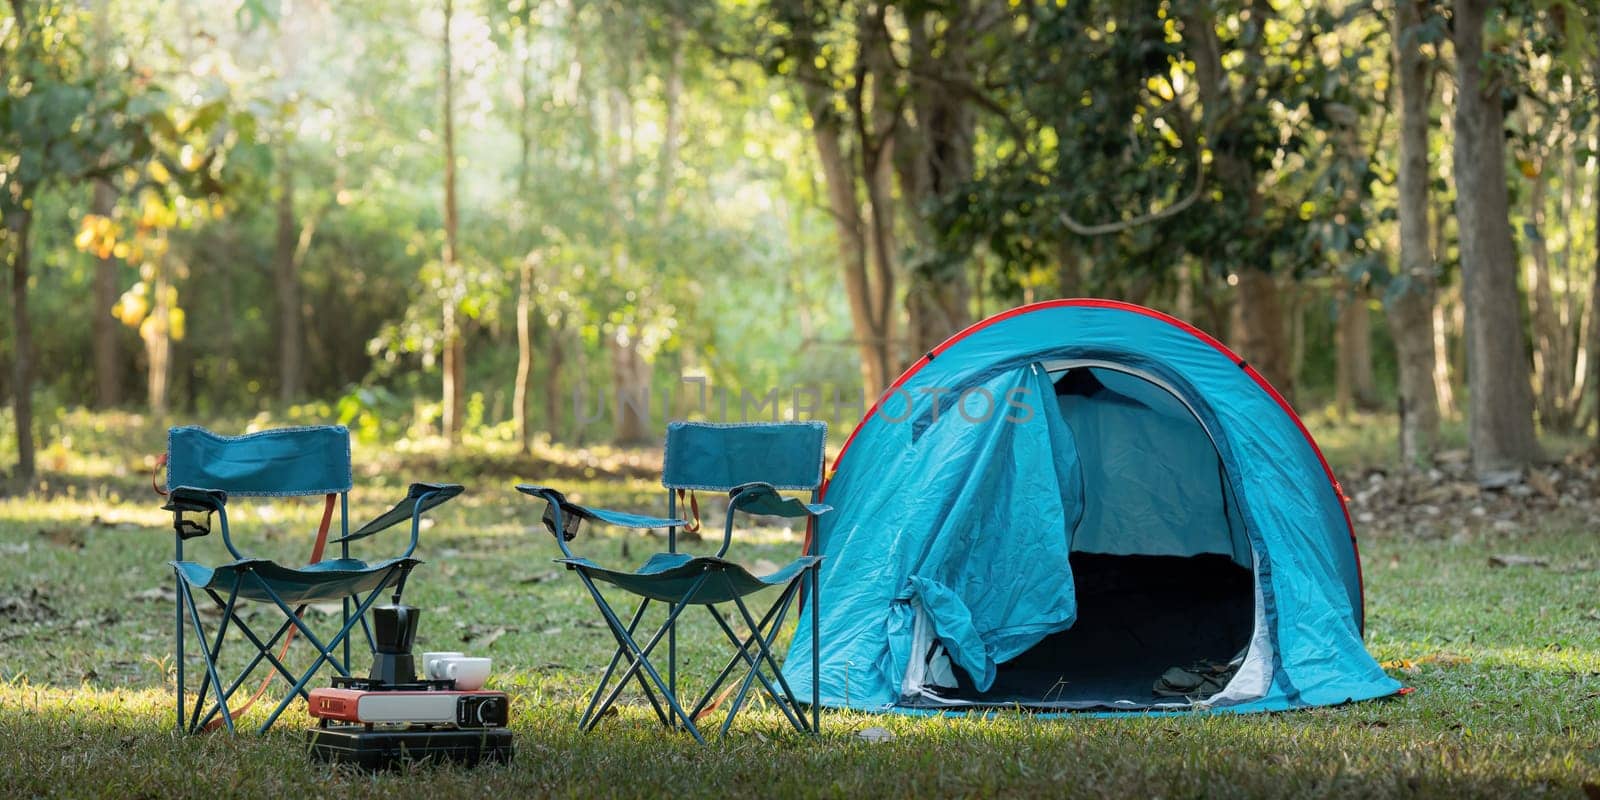 Outdoor activity concept camping are with tent and equipment for camping by nateemee